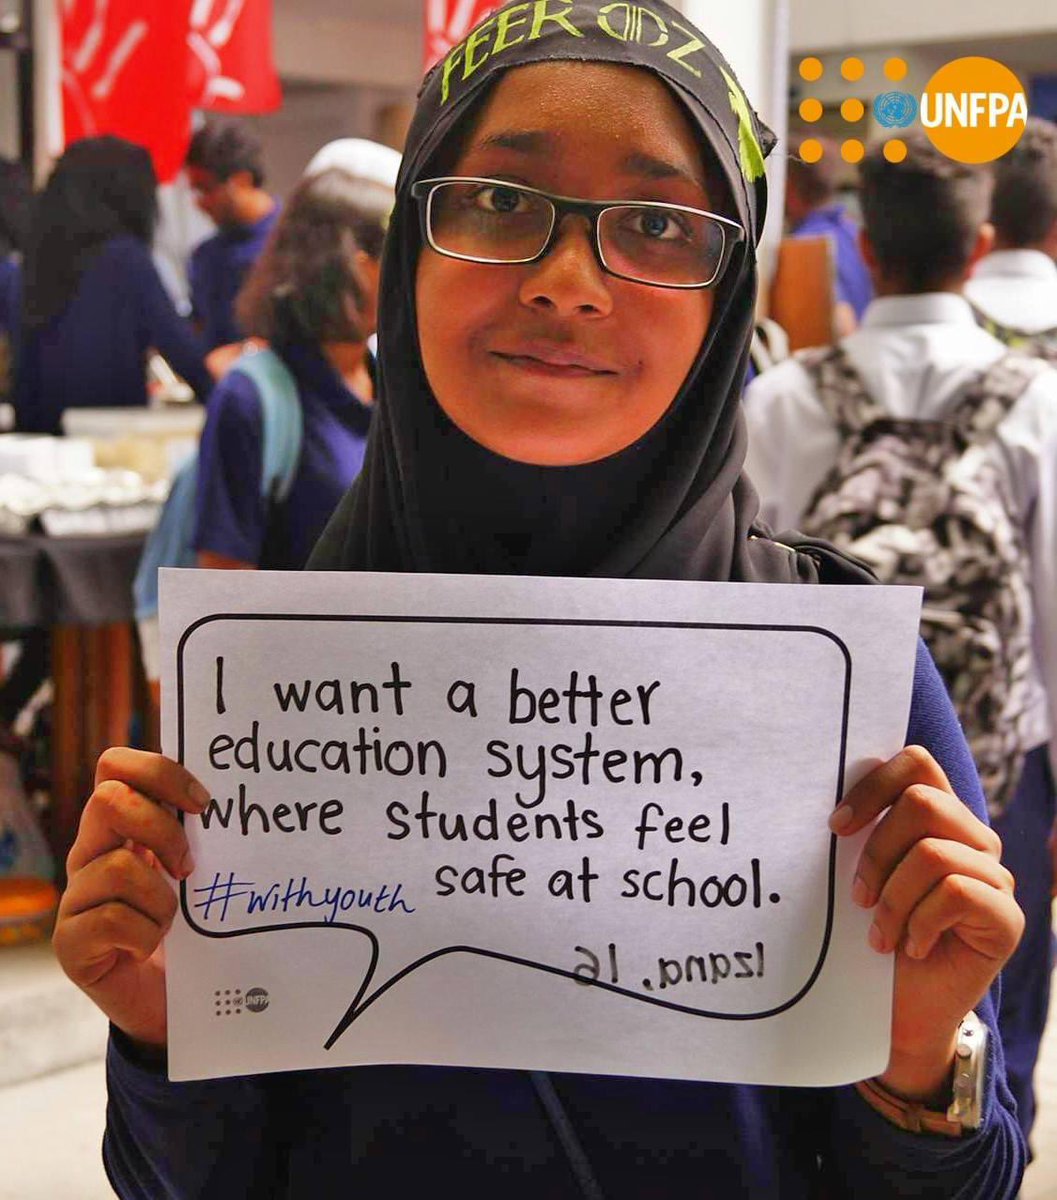 #YoungPeople of the Maldives seek safe spaces where they can express their views and and reach their fullest #potential. Whether it be schools, cafés or even on the streets - we all must feel #safe, secure and #heard in our society 

#youthfriendly #safespaces #unfpamaldives